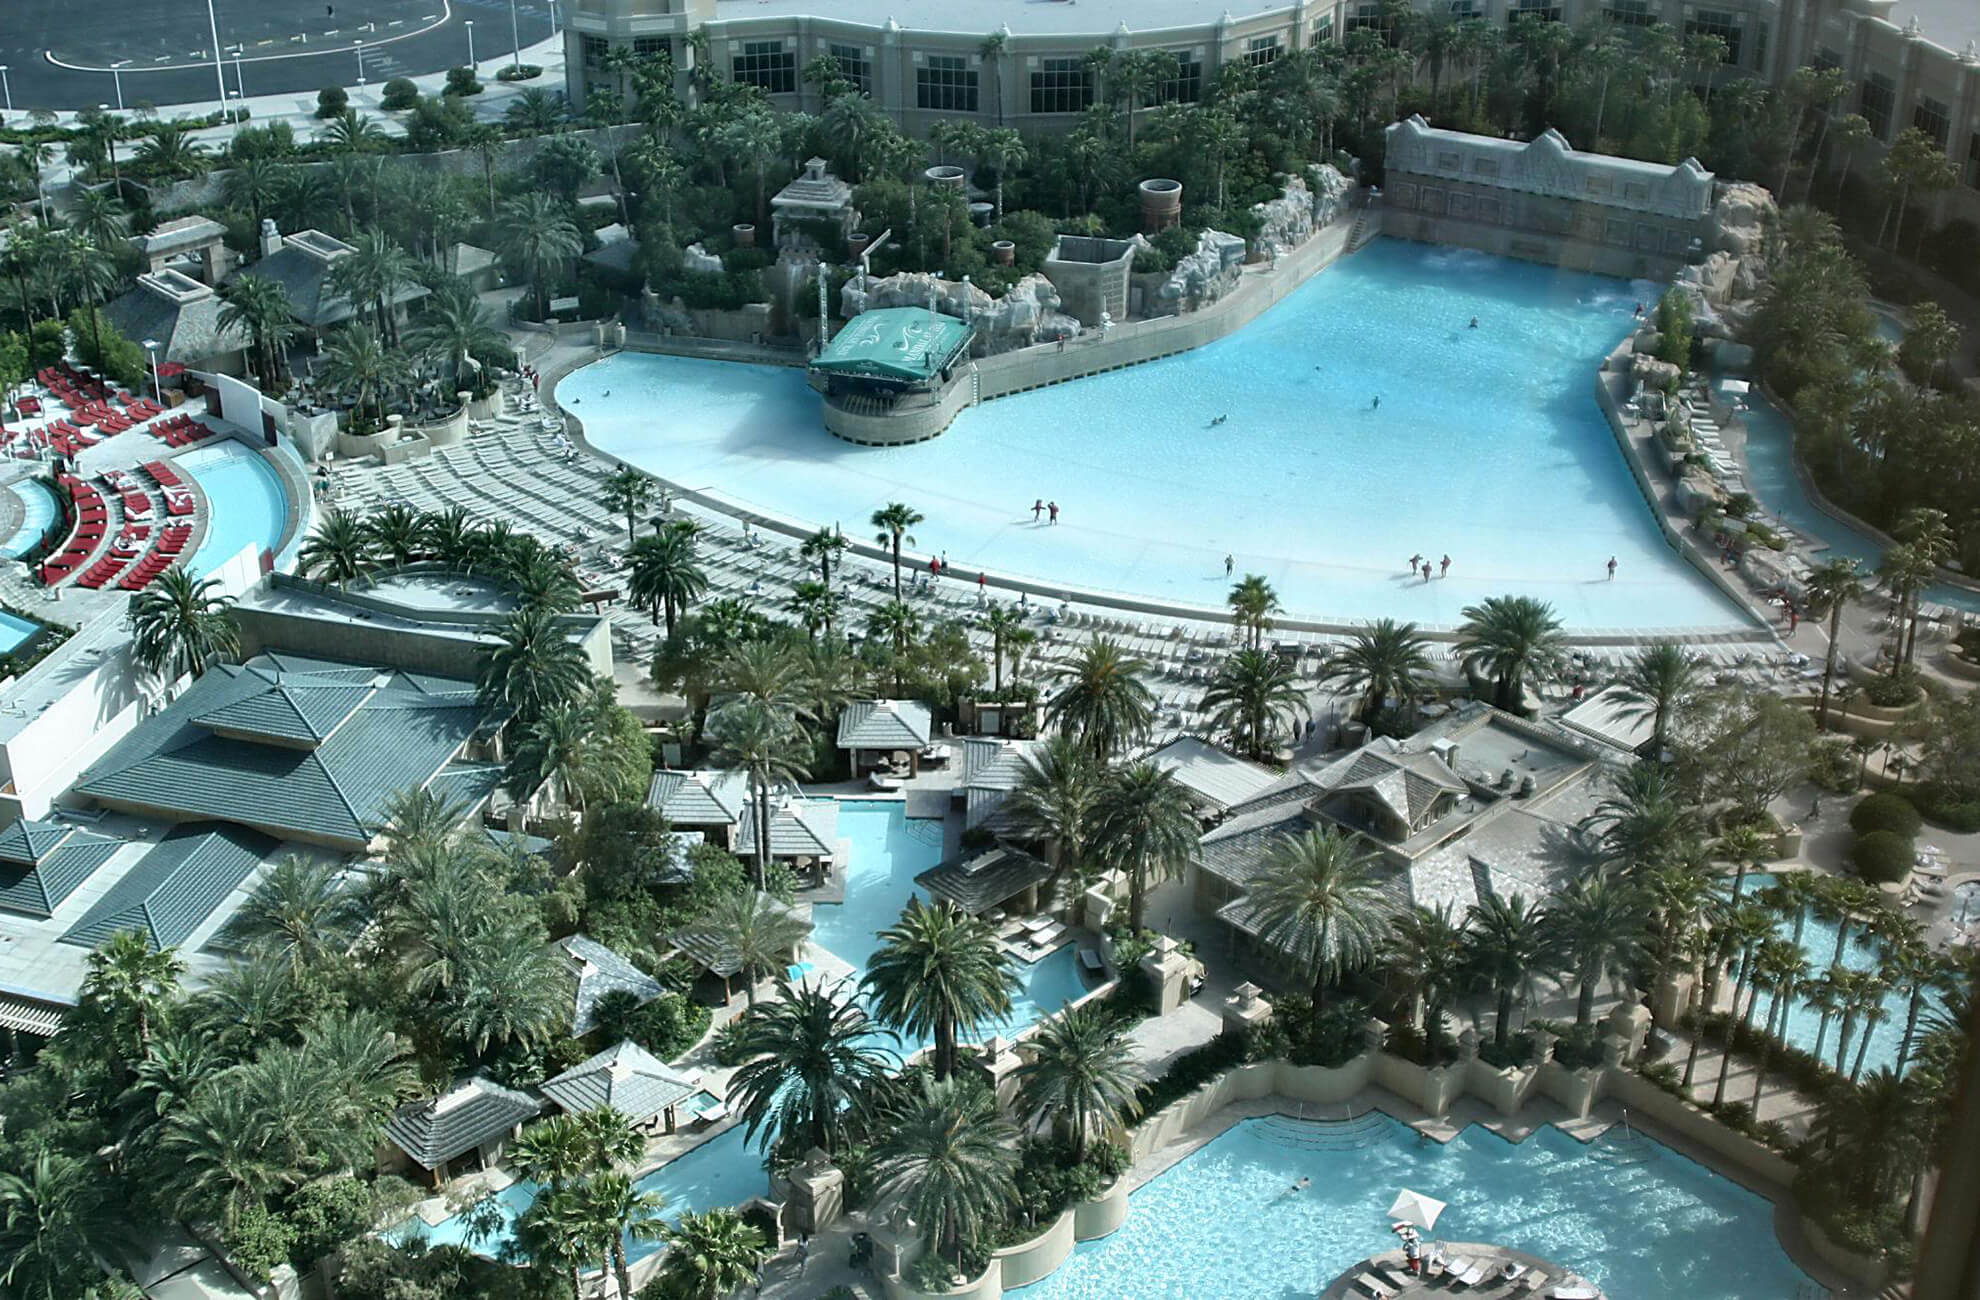 This is a map of the Mandalay Bay Beach pool area to give you a